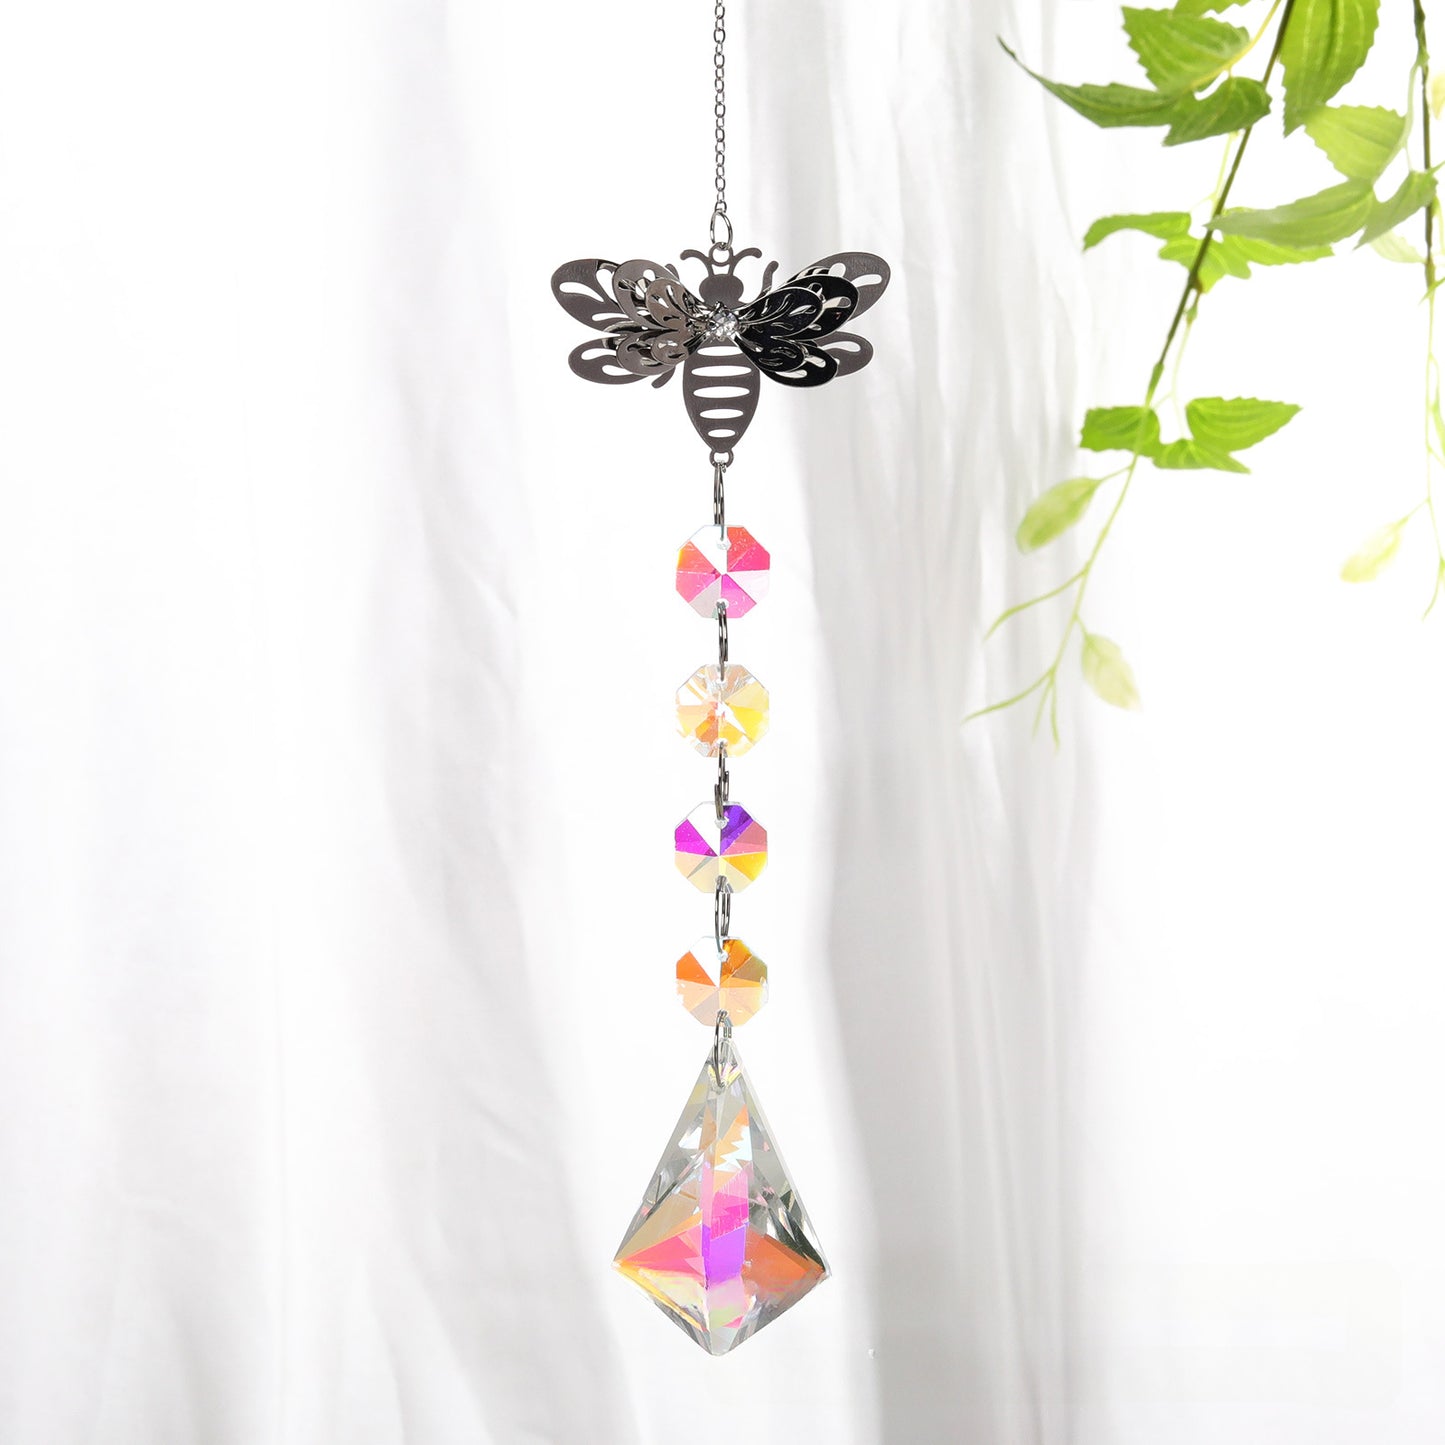 Life Tree Angel Dragonfly Butterfly Octagonal Pearl AB Color Crystal Pendant Garden Horticultural Pendant Sunshine Reflection